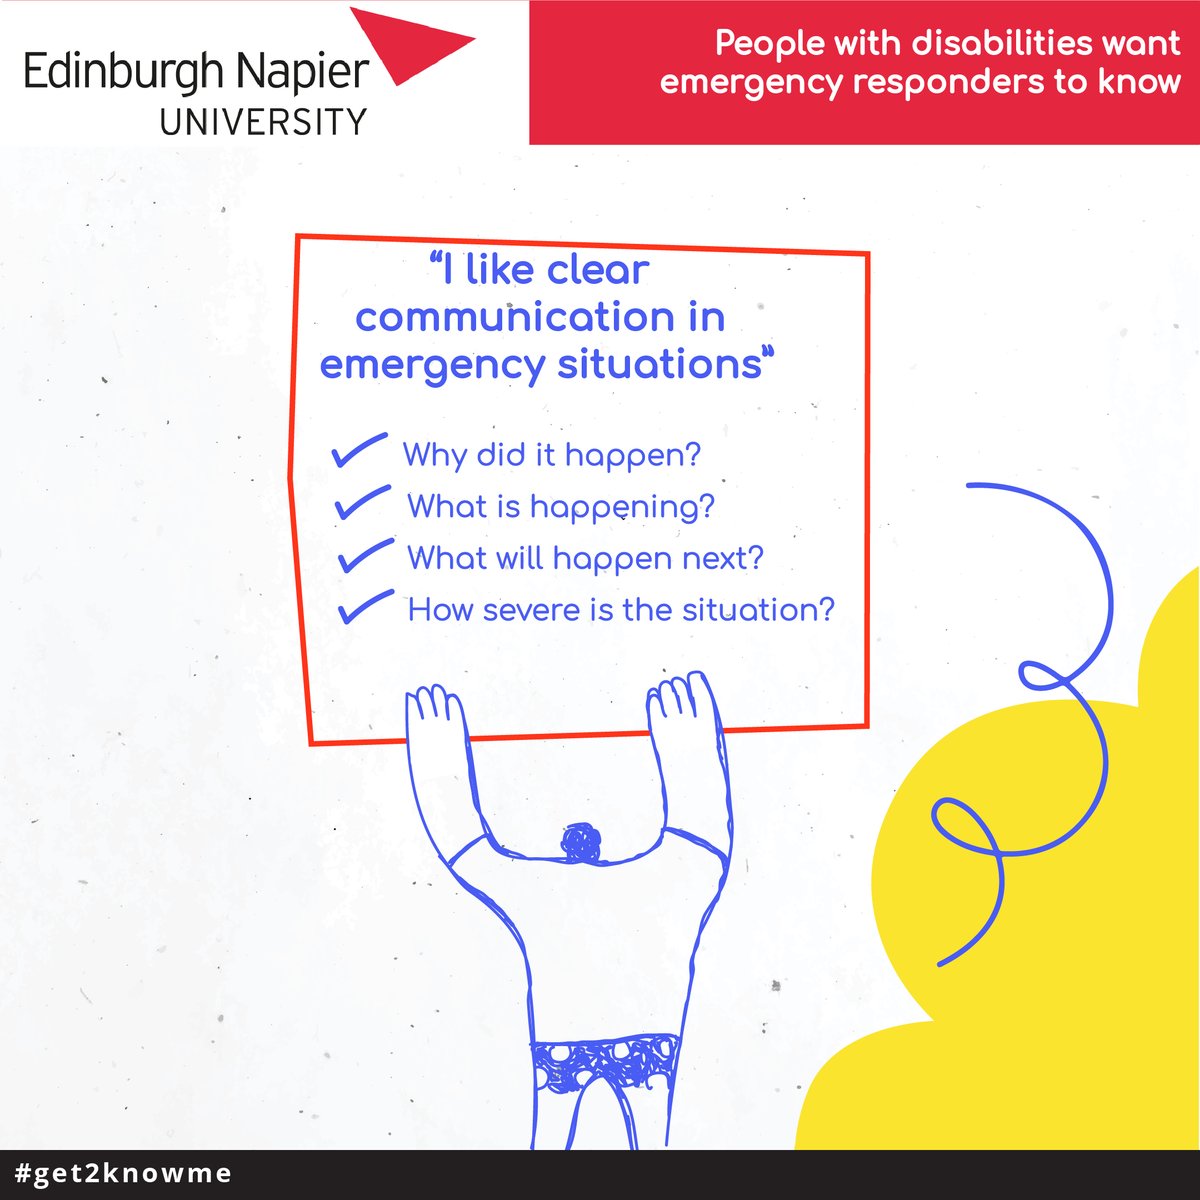 Researchers @EdinburghNapier launched the #get2knowme campaign this week to raise awareness on how to improve emergency services for people with learning disabilities. The campaign posters have been co-designed by people with learning disabilities.